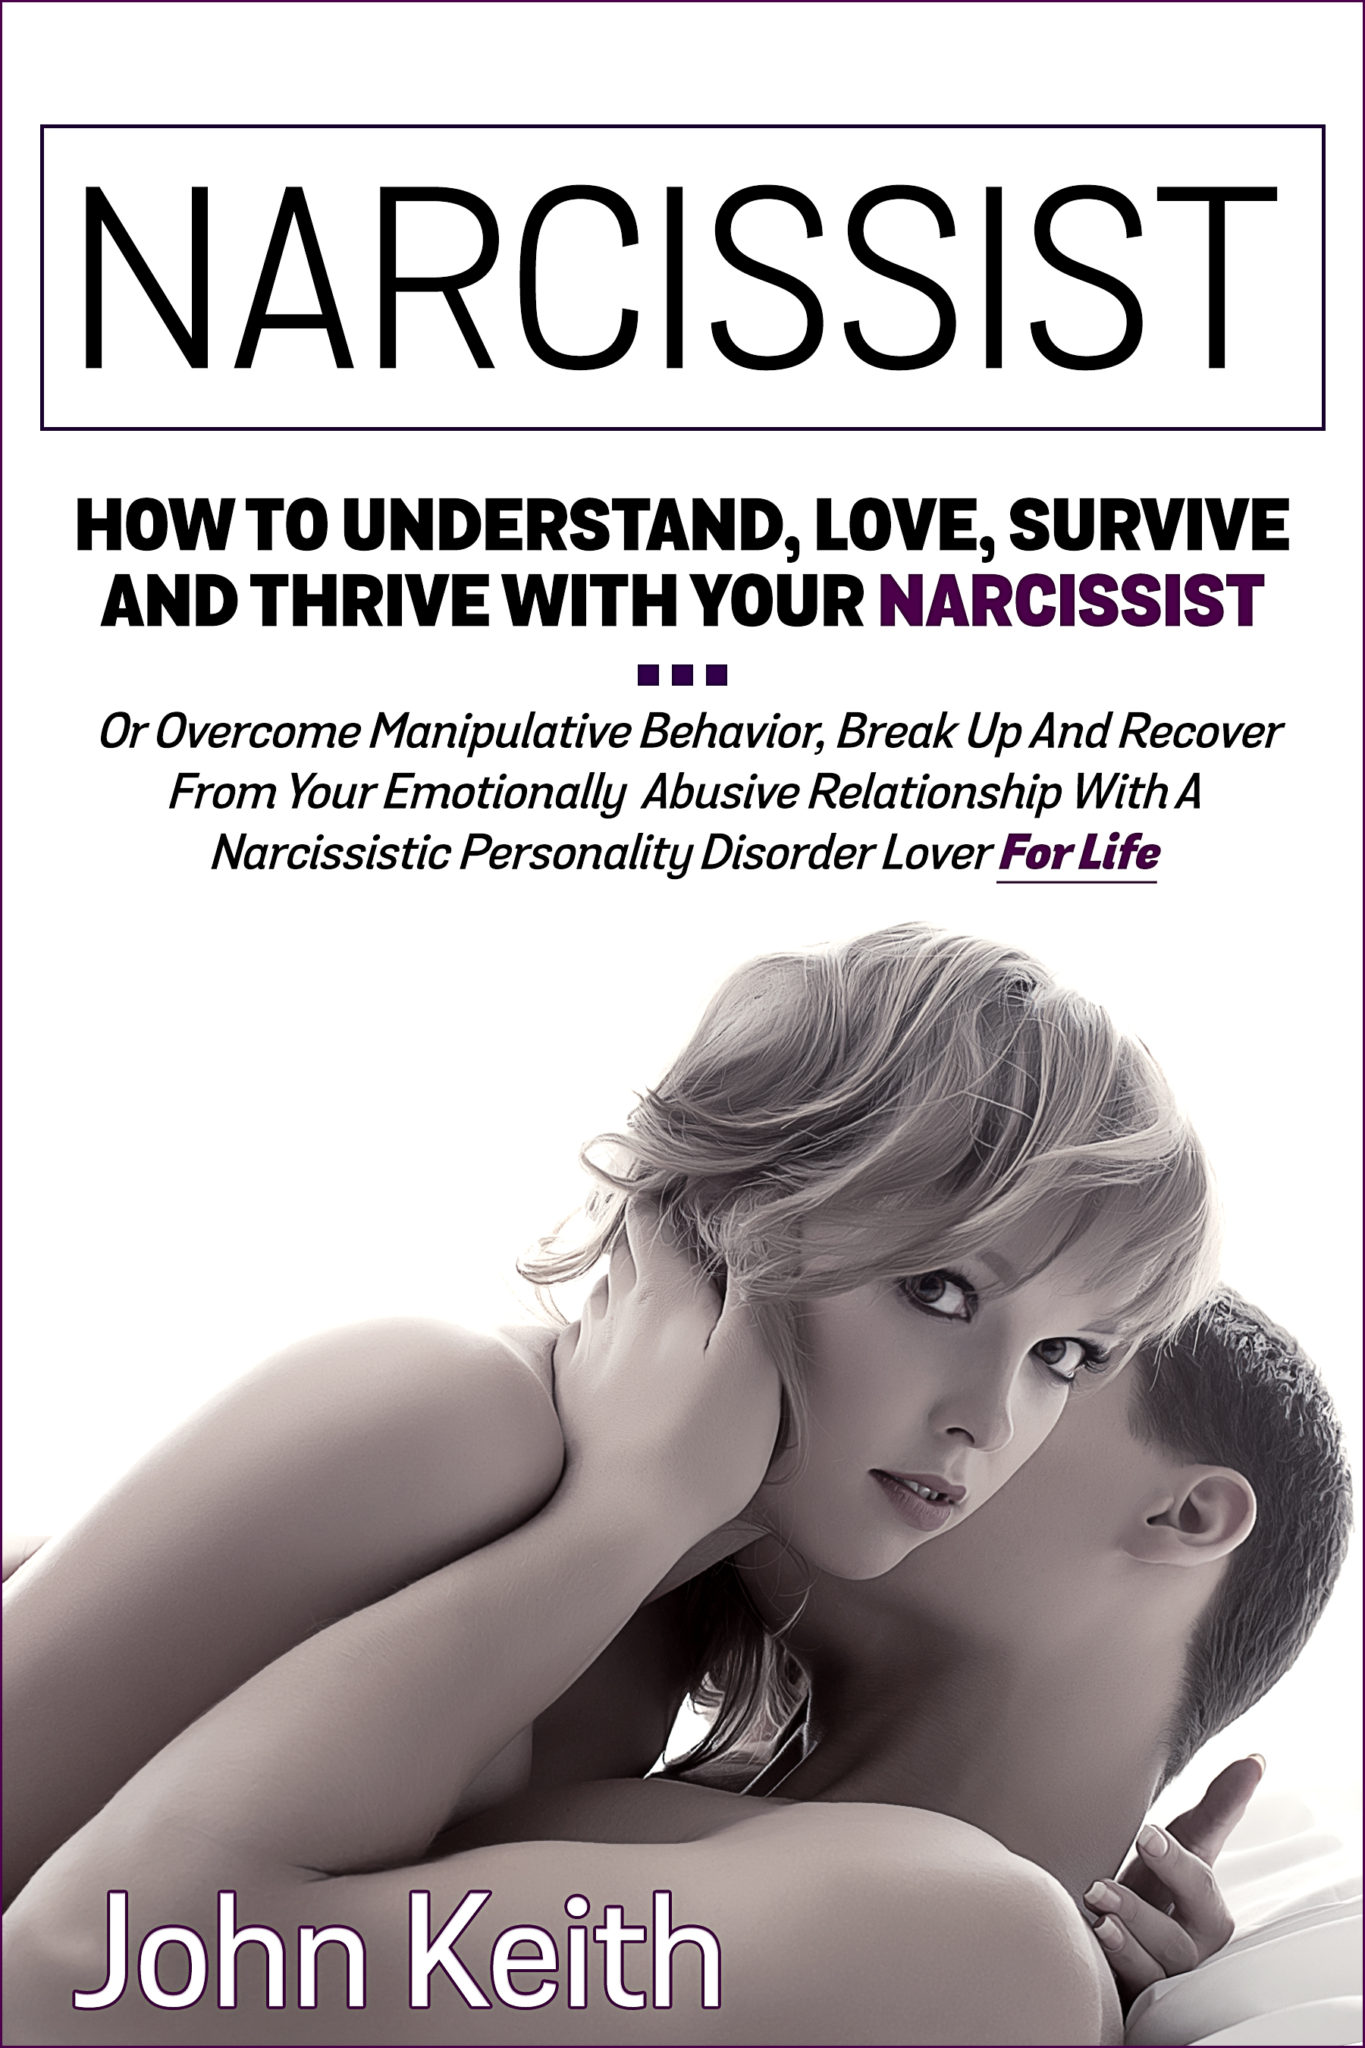 FREE: Narcissist: How To Understand, Love, Survive And Thrive With Your Narcissist (Or Overcome Manipulative Behavior, Break Up And Recover From Your Emotionally Abusive Relationship With A Narcissistic Personality Disorder Lover) For Life by John Keith